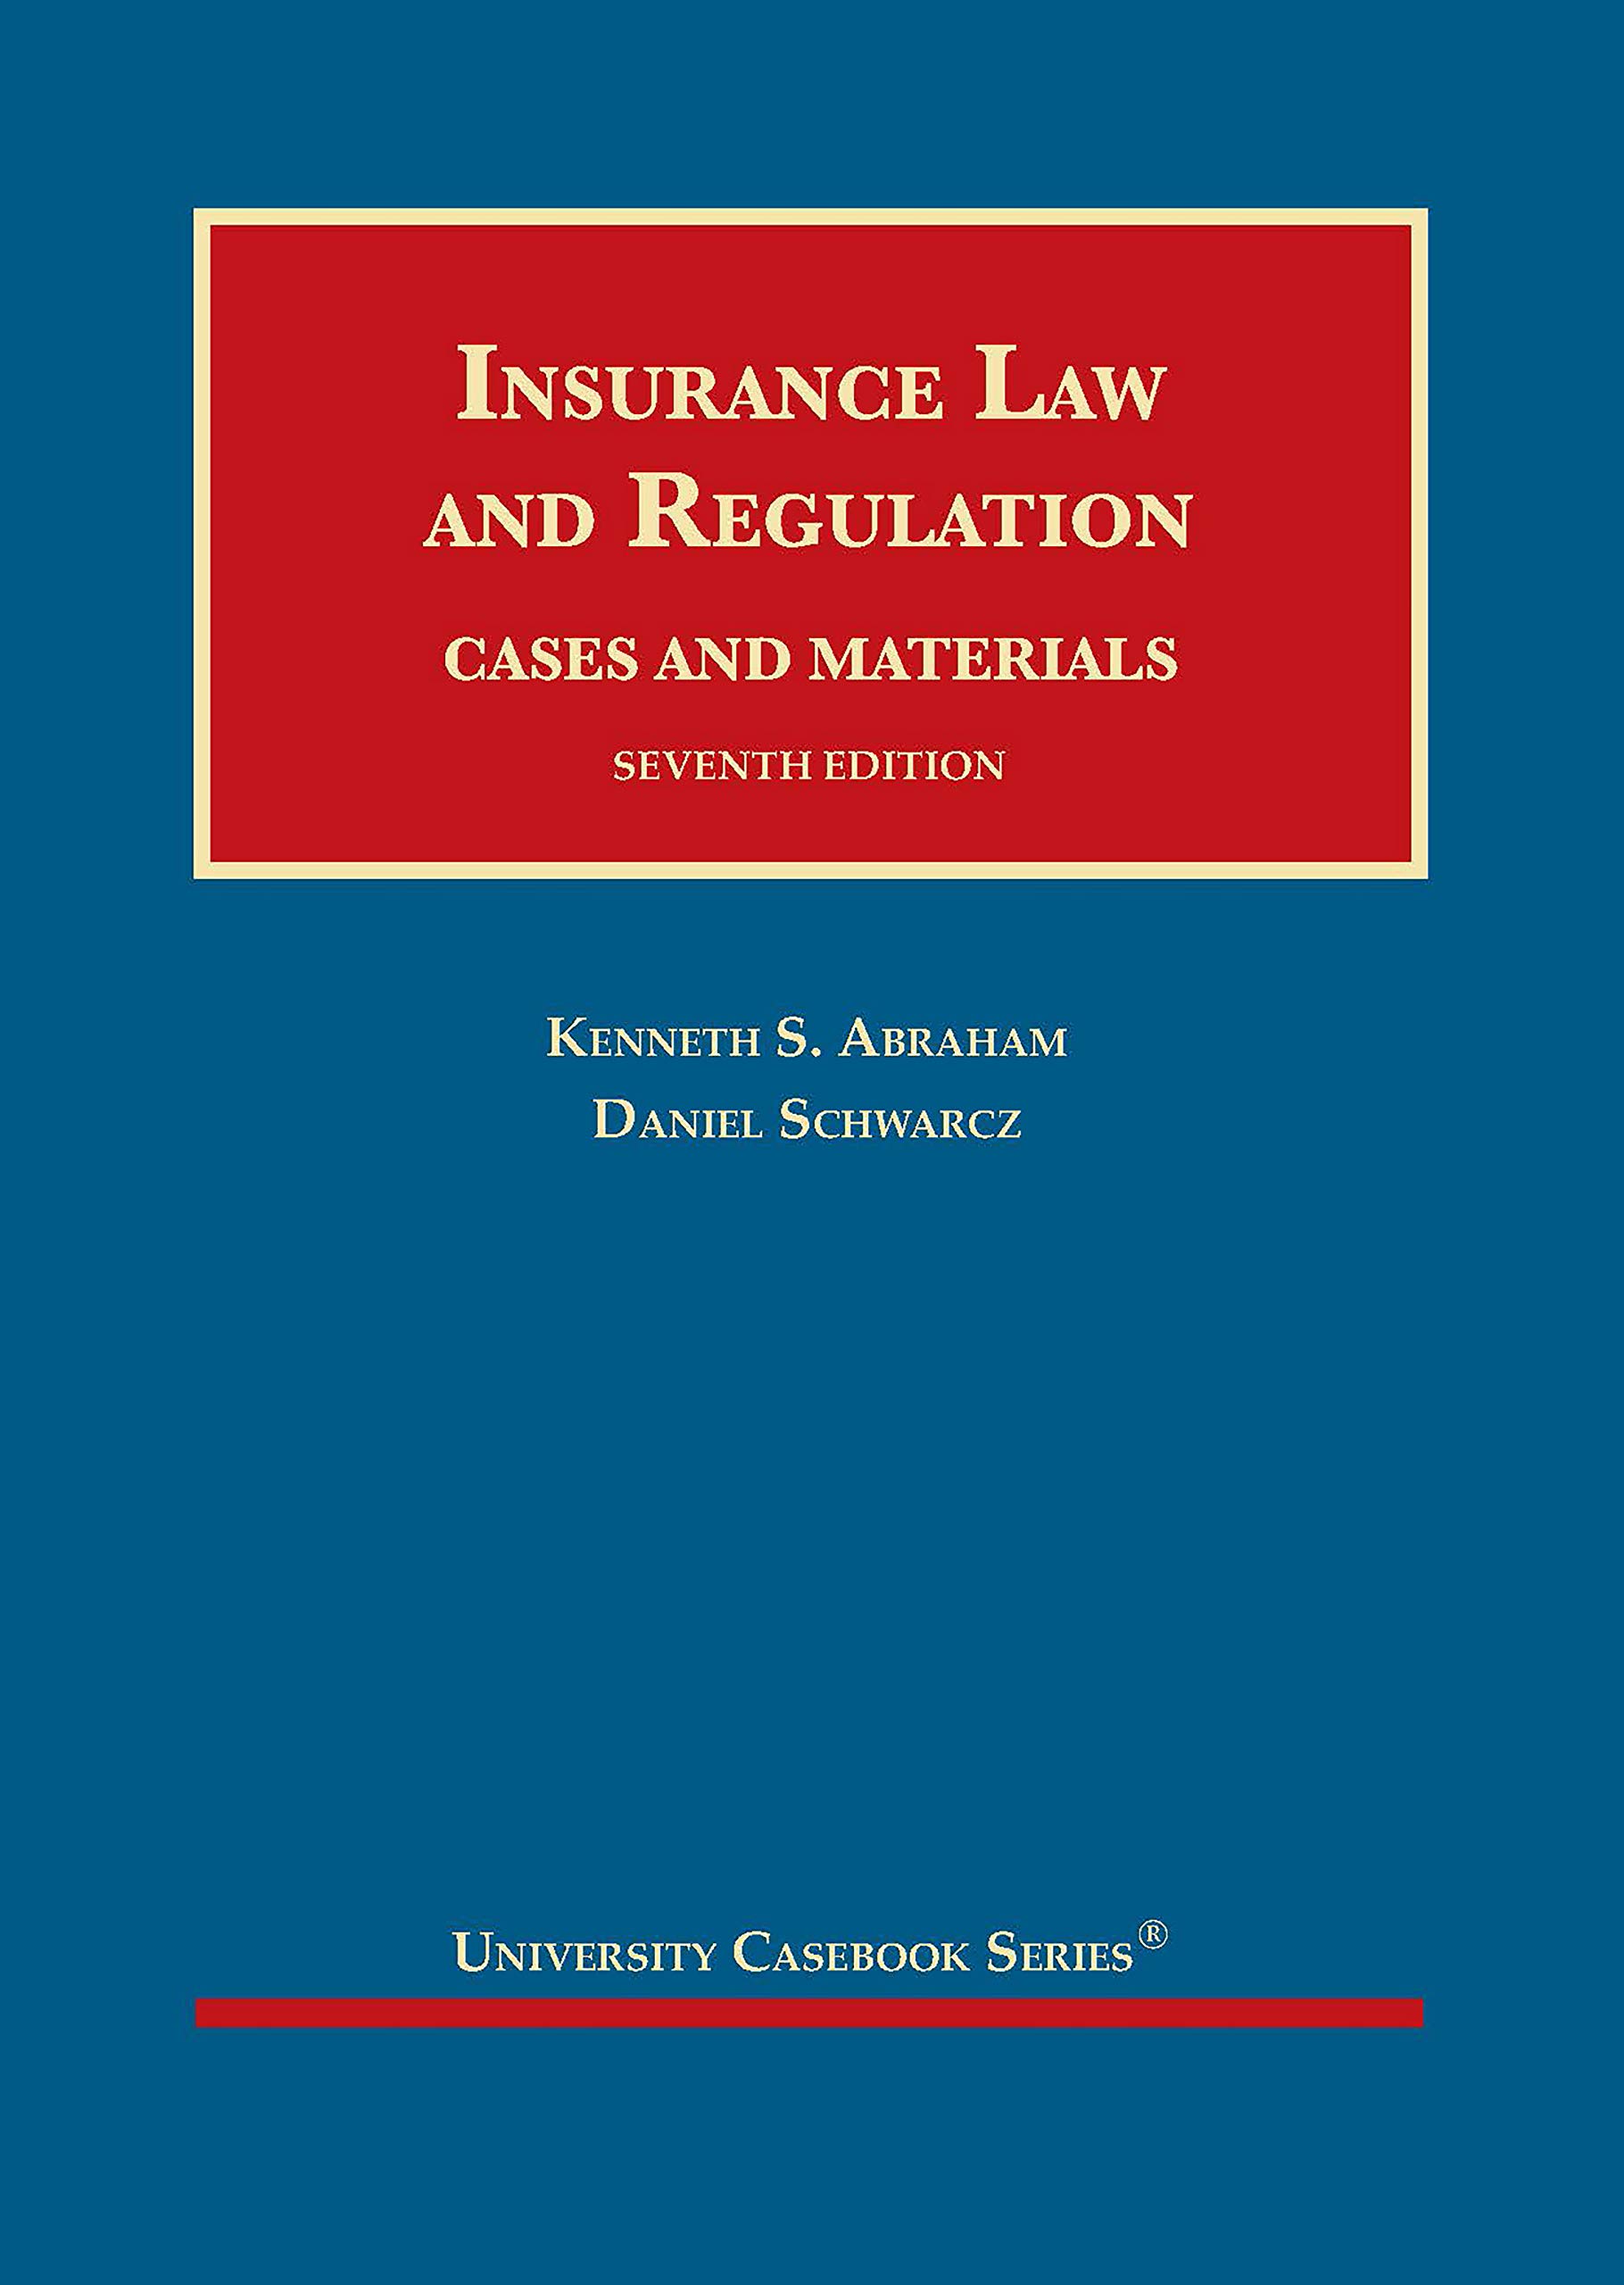 Insurance Law and Regulation, Cases and Materials (University Casebook Series)